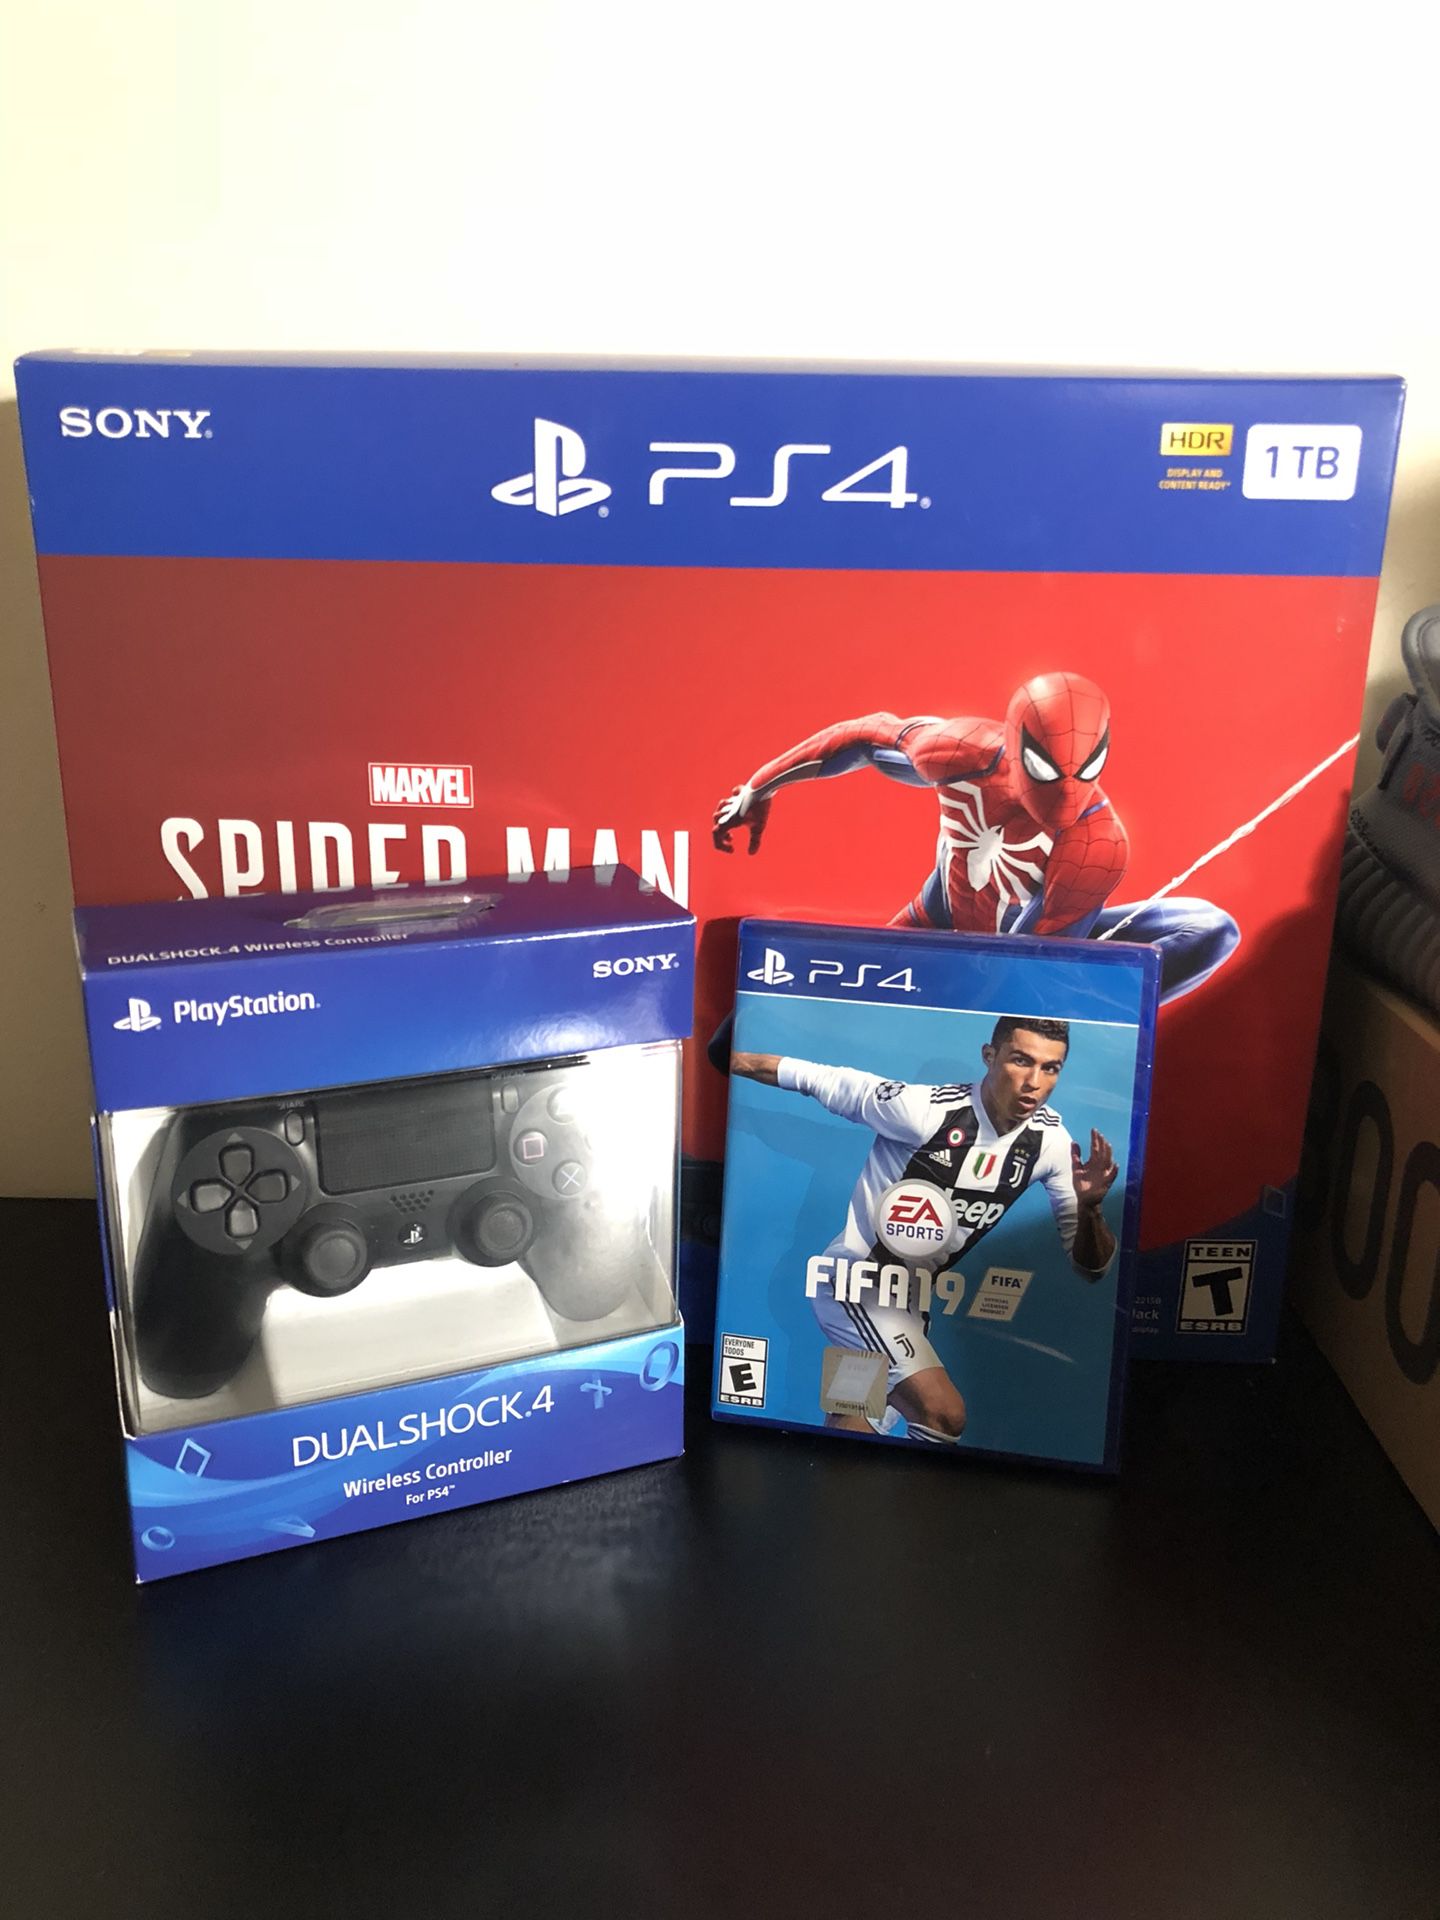 Ps4 Slim 1Tb , New controller and Fifa 19